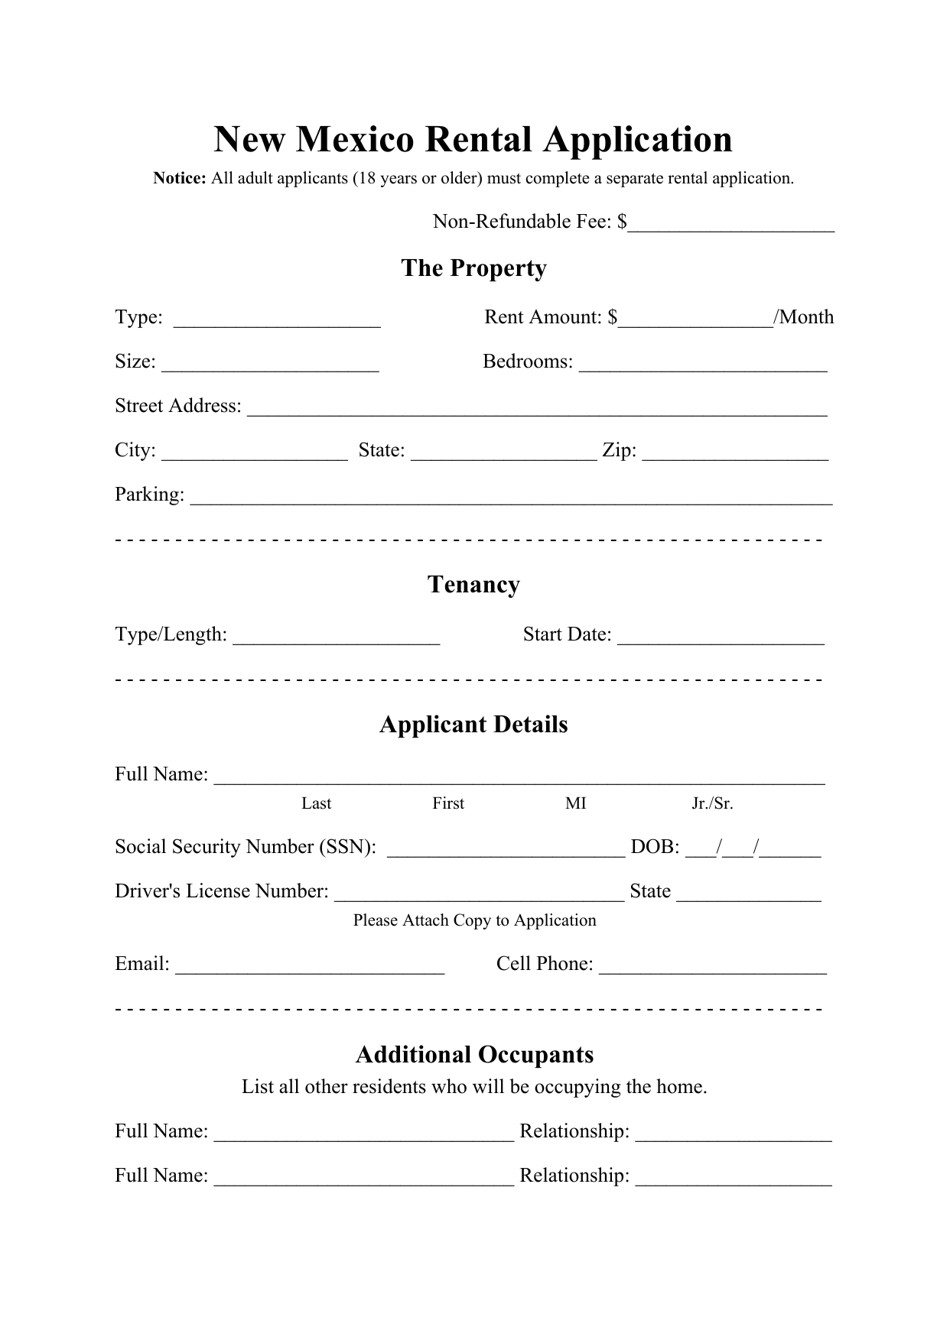 Rental Application Form - New Mexico, Page 1